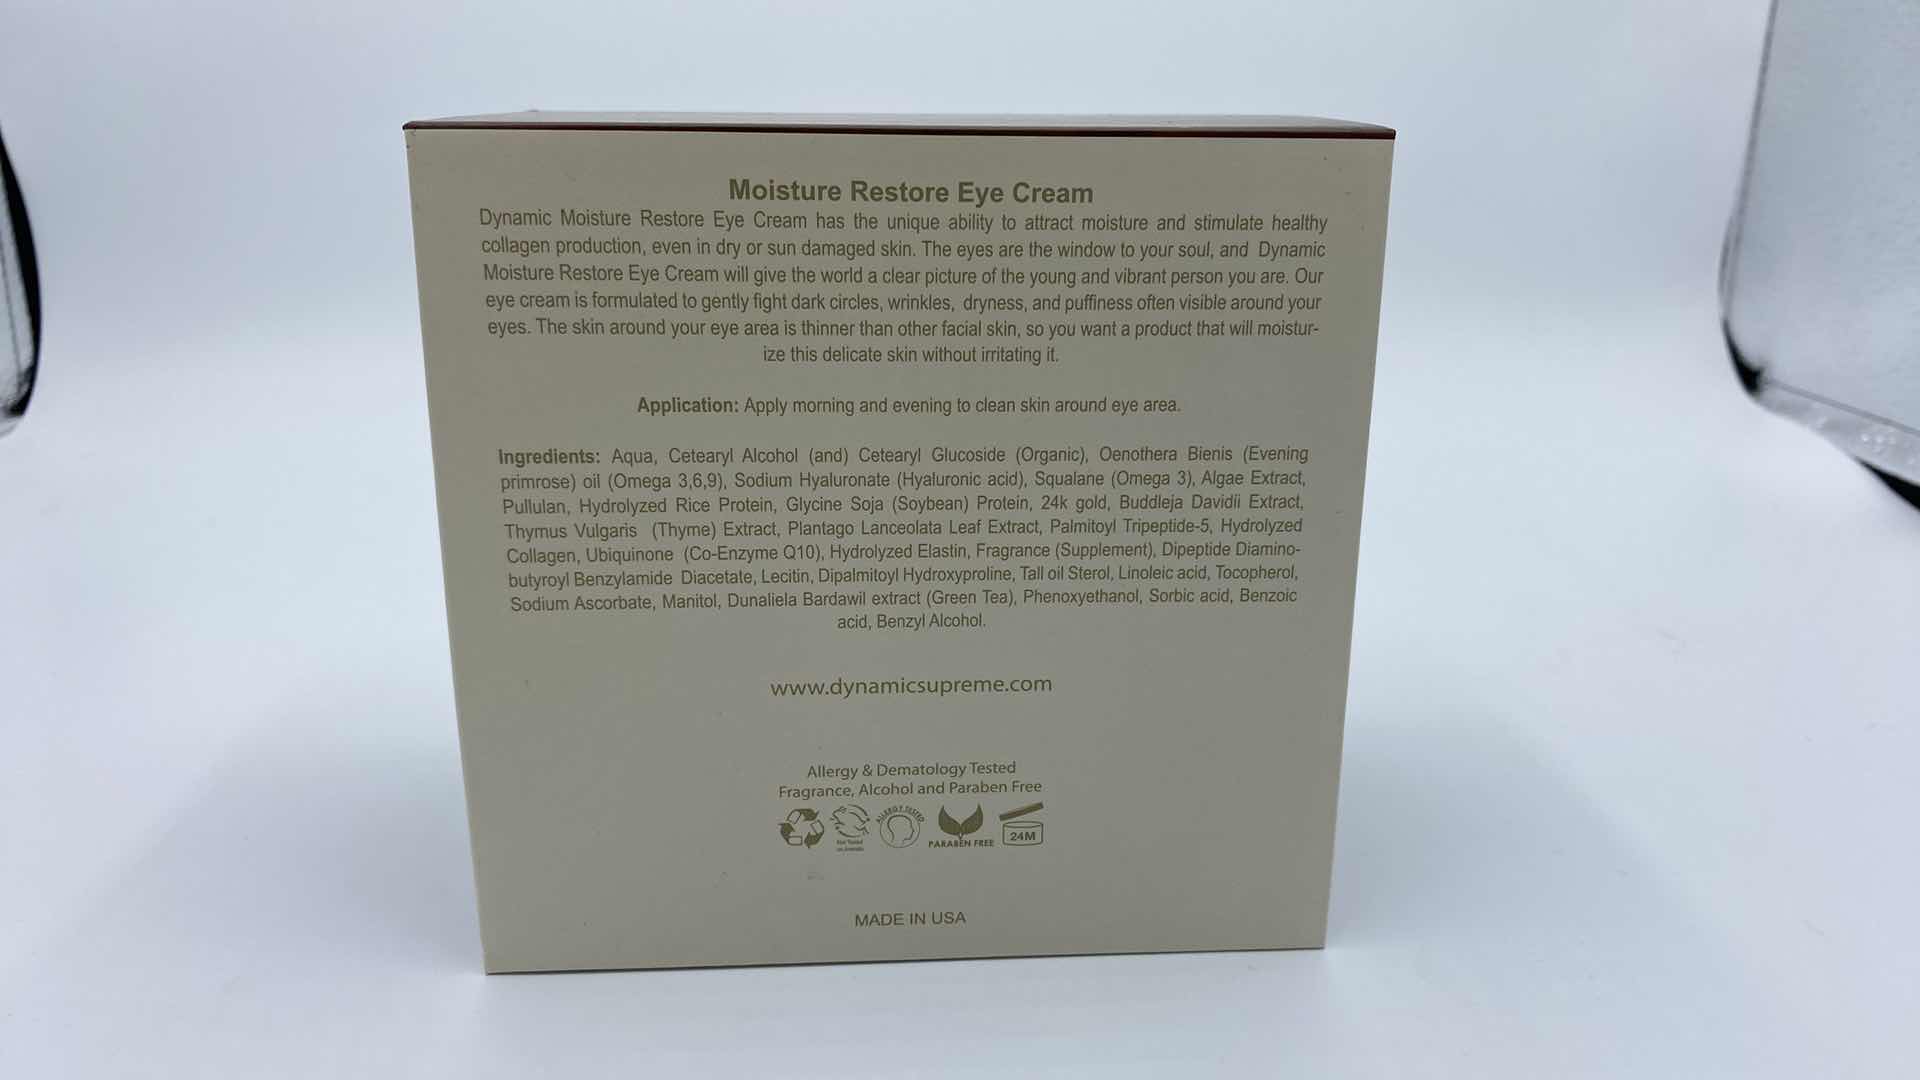 Photo 3 of NEW - DYNAMIC SUPREME MOISTURE RESTORE EYE CREAM ATTRACTS MOISTURE AND STIMULATES HEALTHY COLLAGEN PRODUCTION